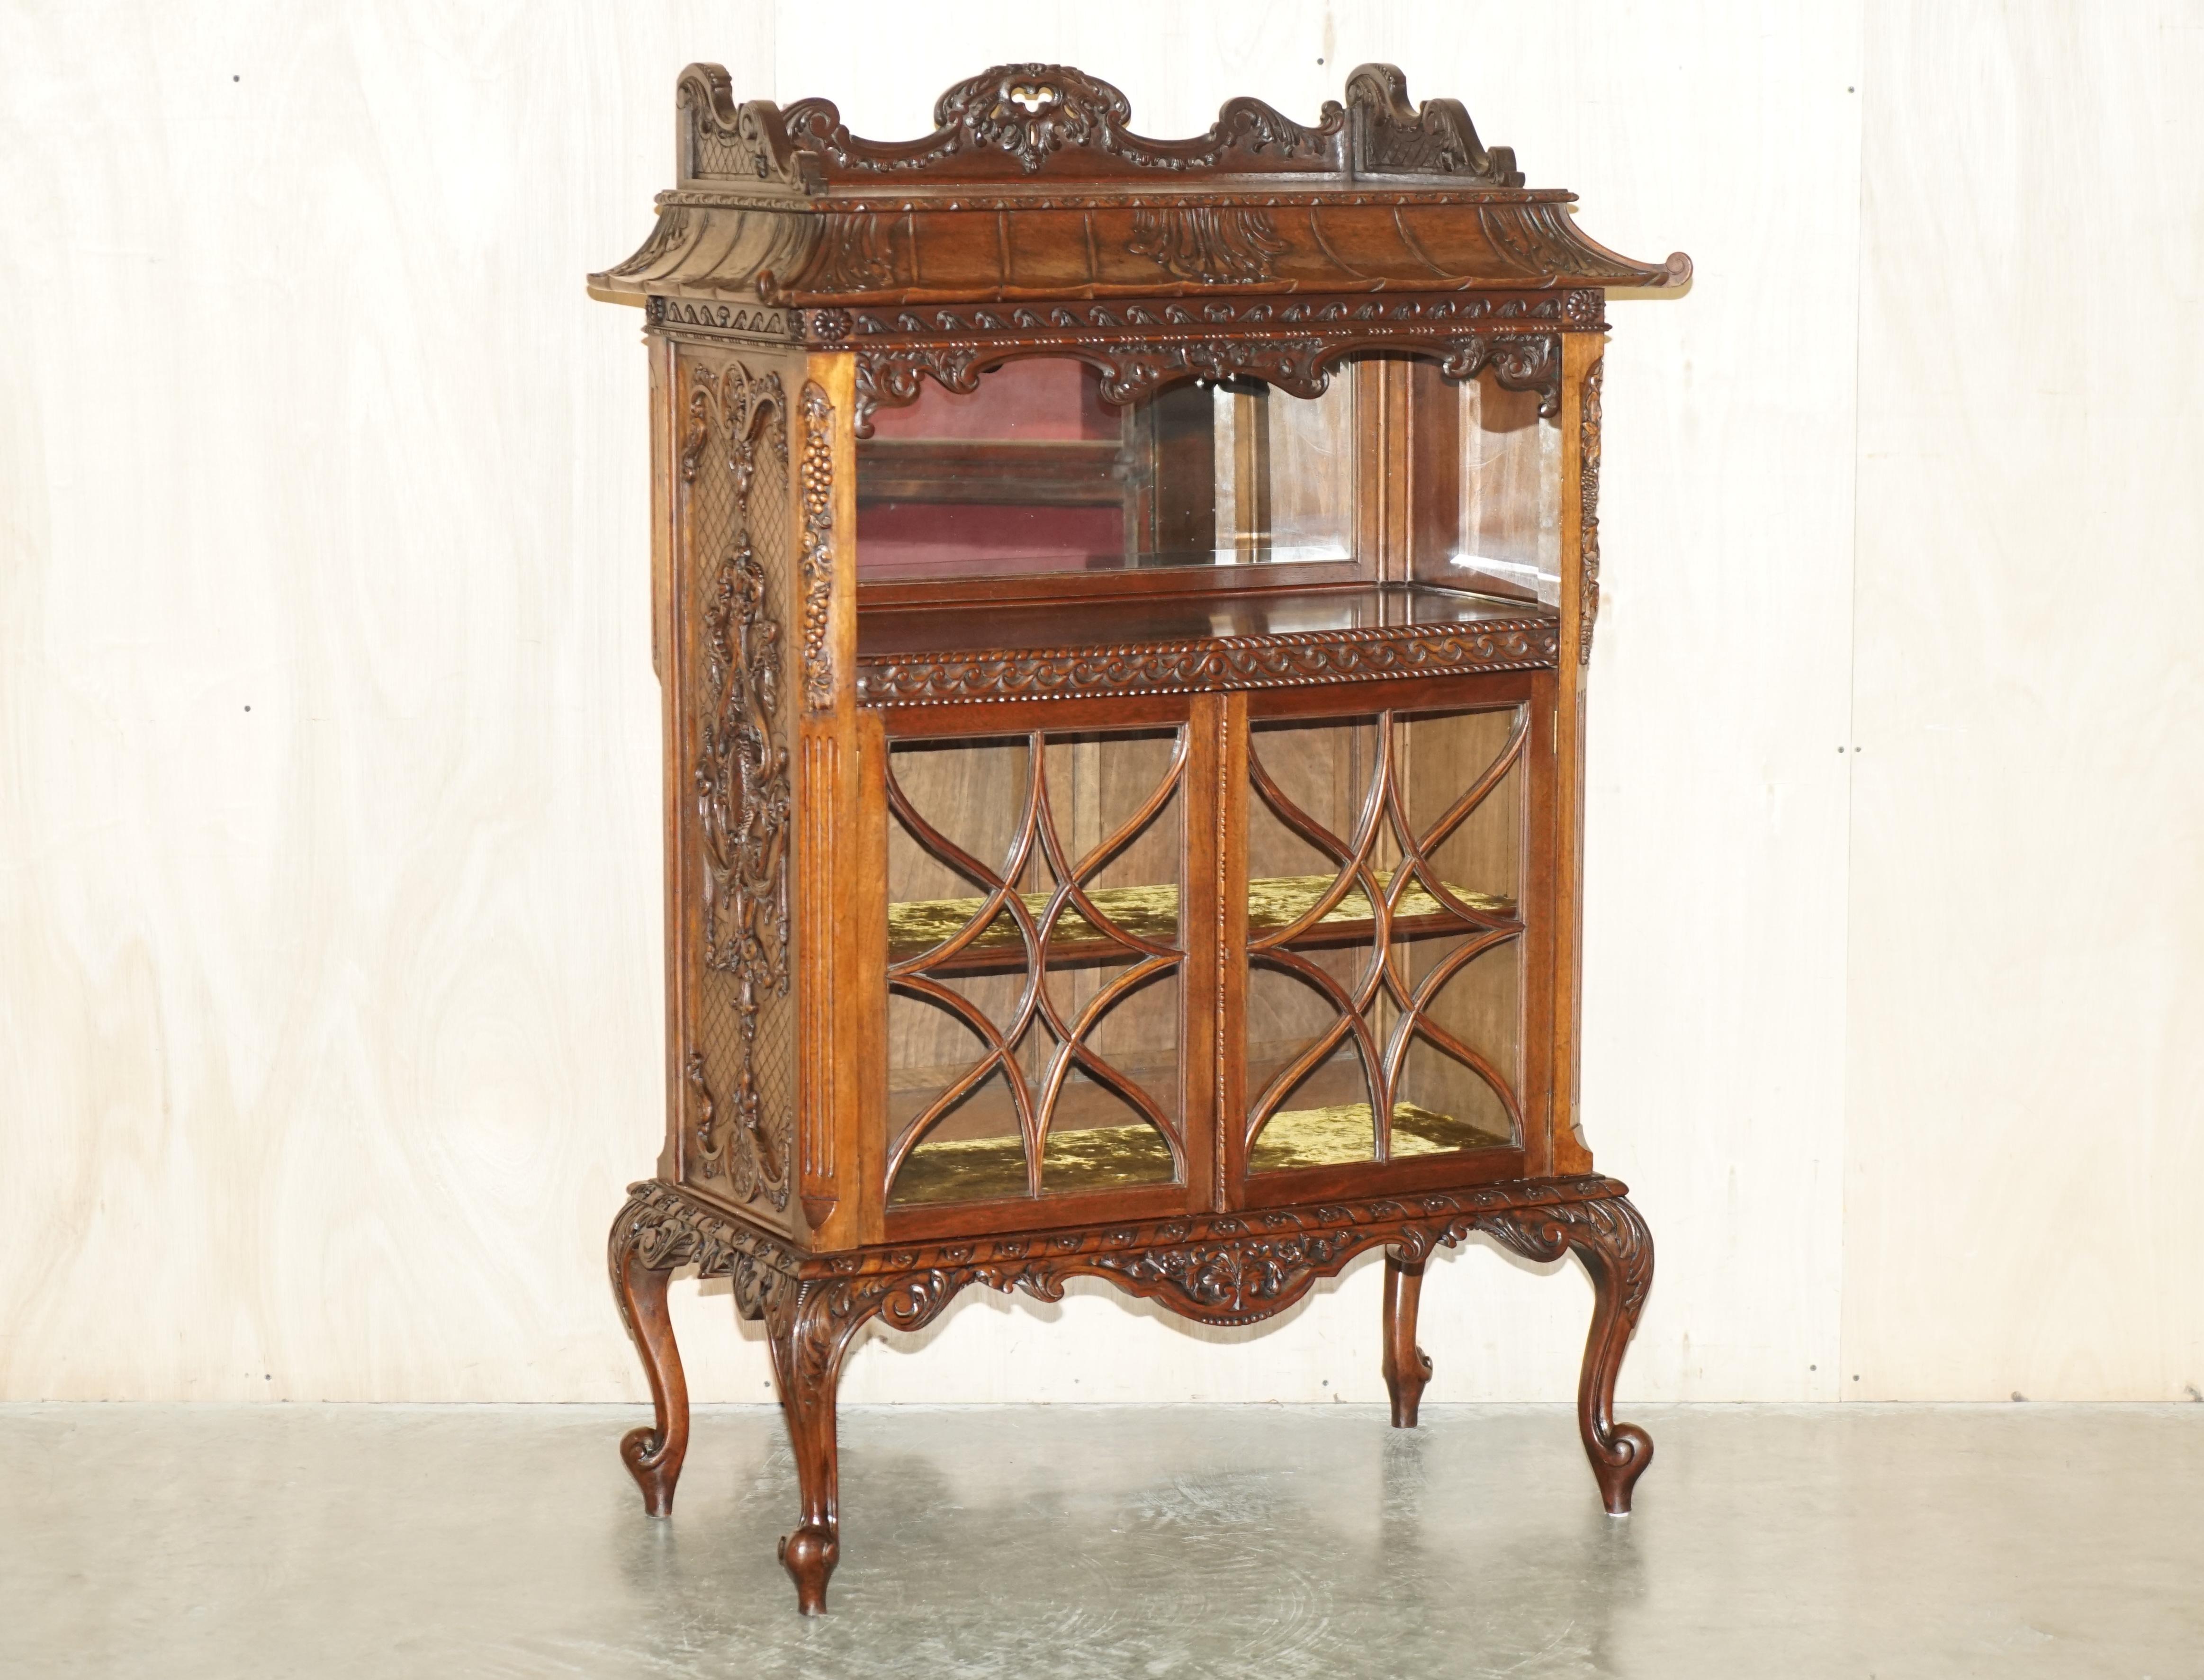 Royal House Antiques is delighted to offer for sale this absolutely exquisite Thomas Chippendale style, Pagoda top, display cabinet with Astral Glazed doors 

Please note the delivery fee listed is just a guide, it covers within the M25 only for the